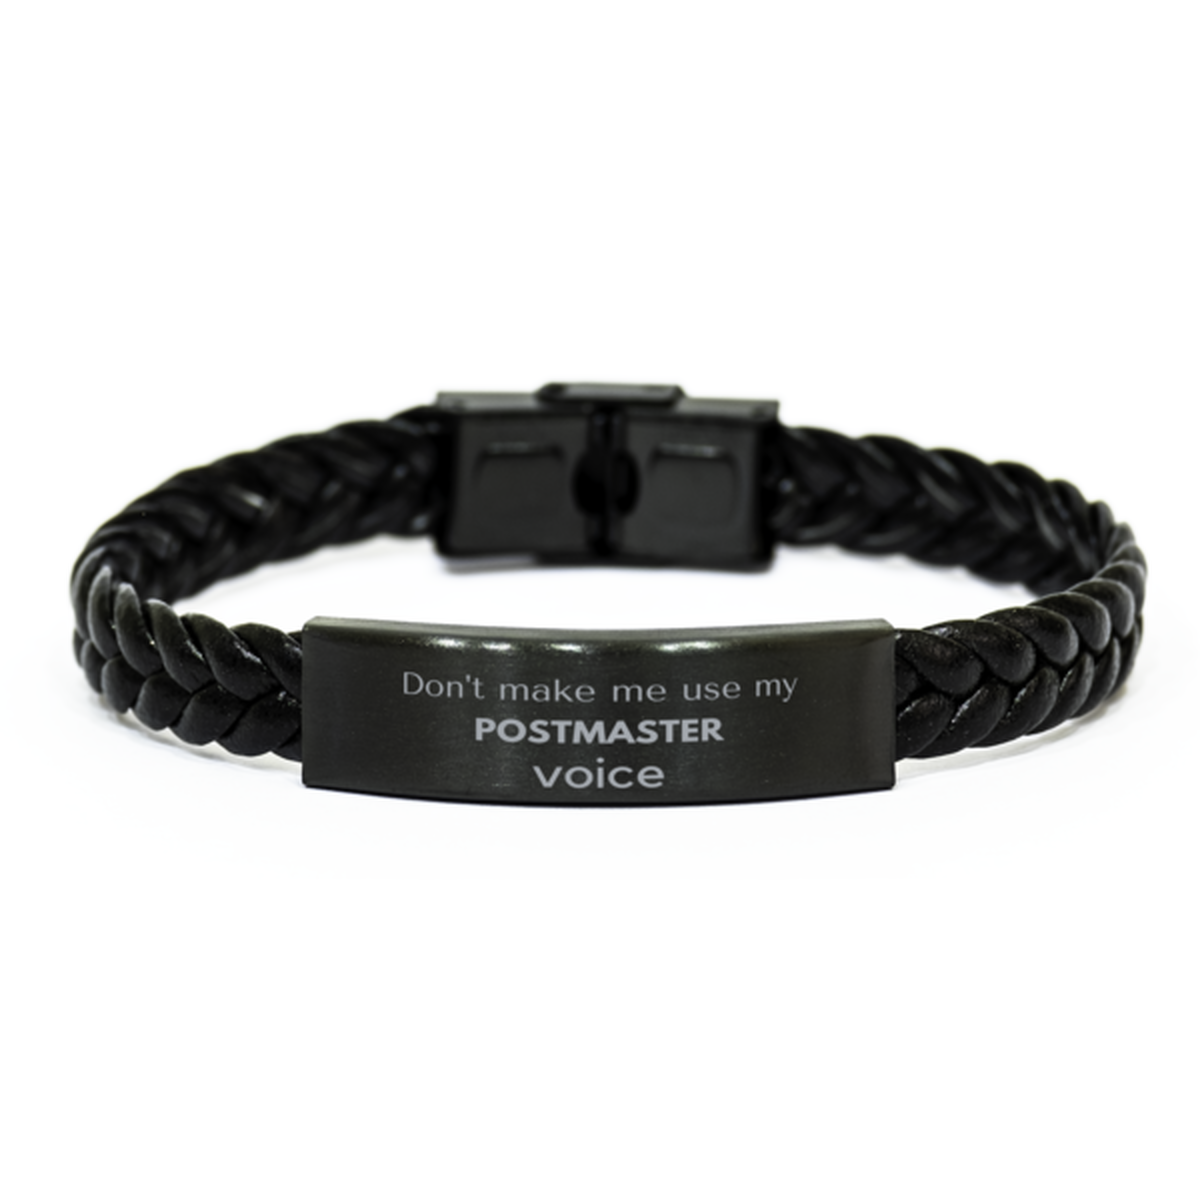 Don't make me use my Postmaster voice, Sarcasm Postmaster Gifts, Christmas Postmaster Braided Leather Bracelet Birthday Unique Gifts For Postmaster Coworkers, Men, Women, Colleague, Friends